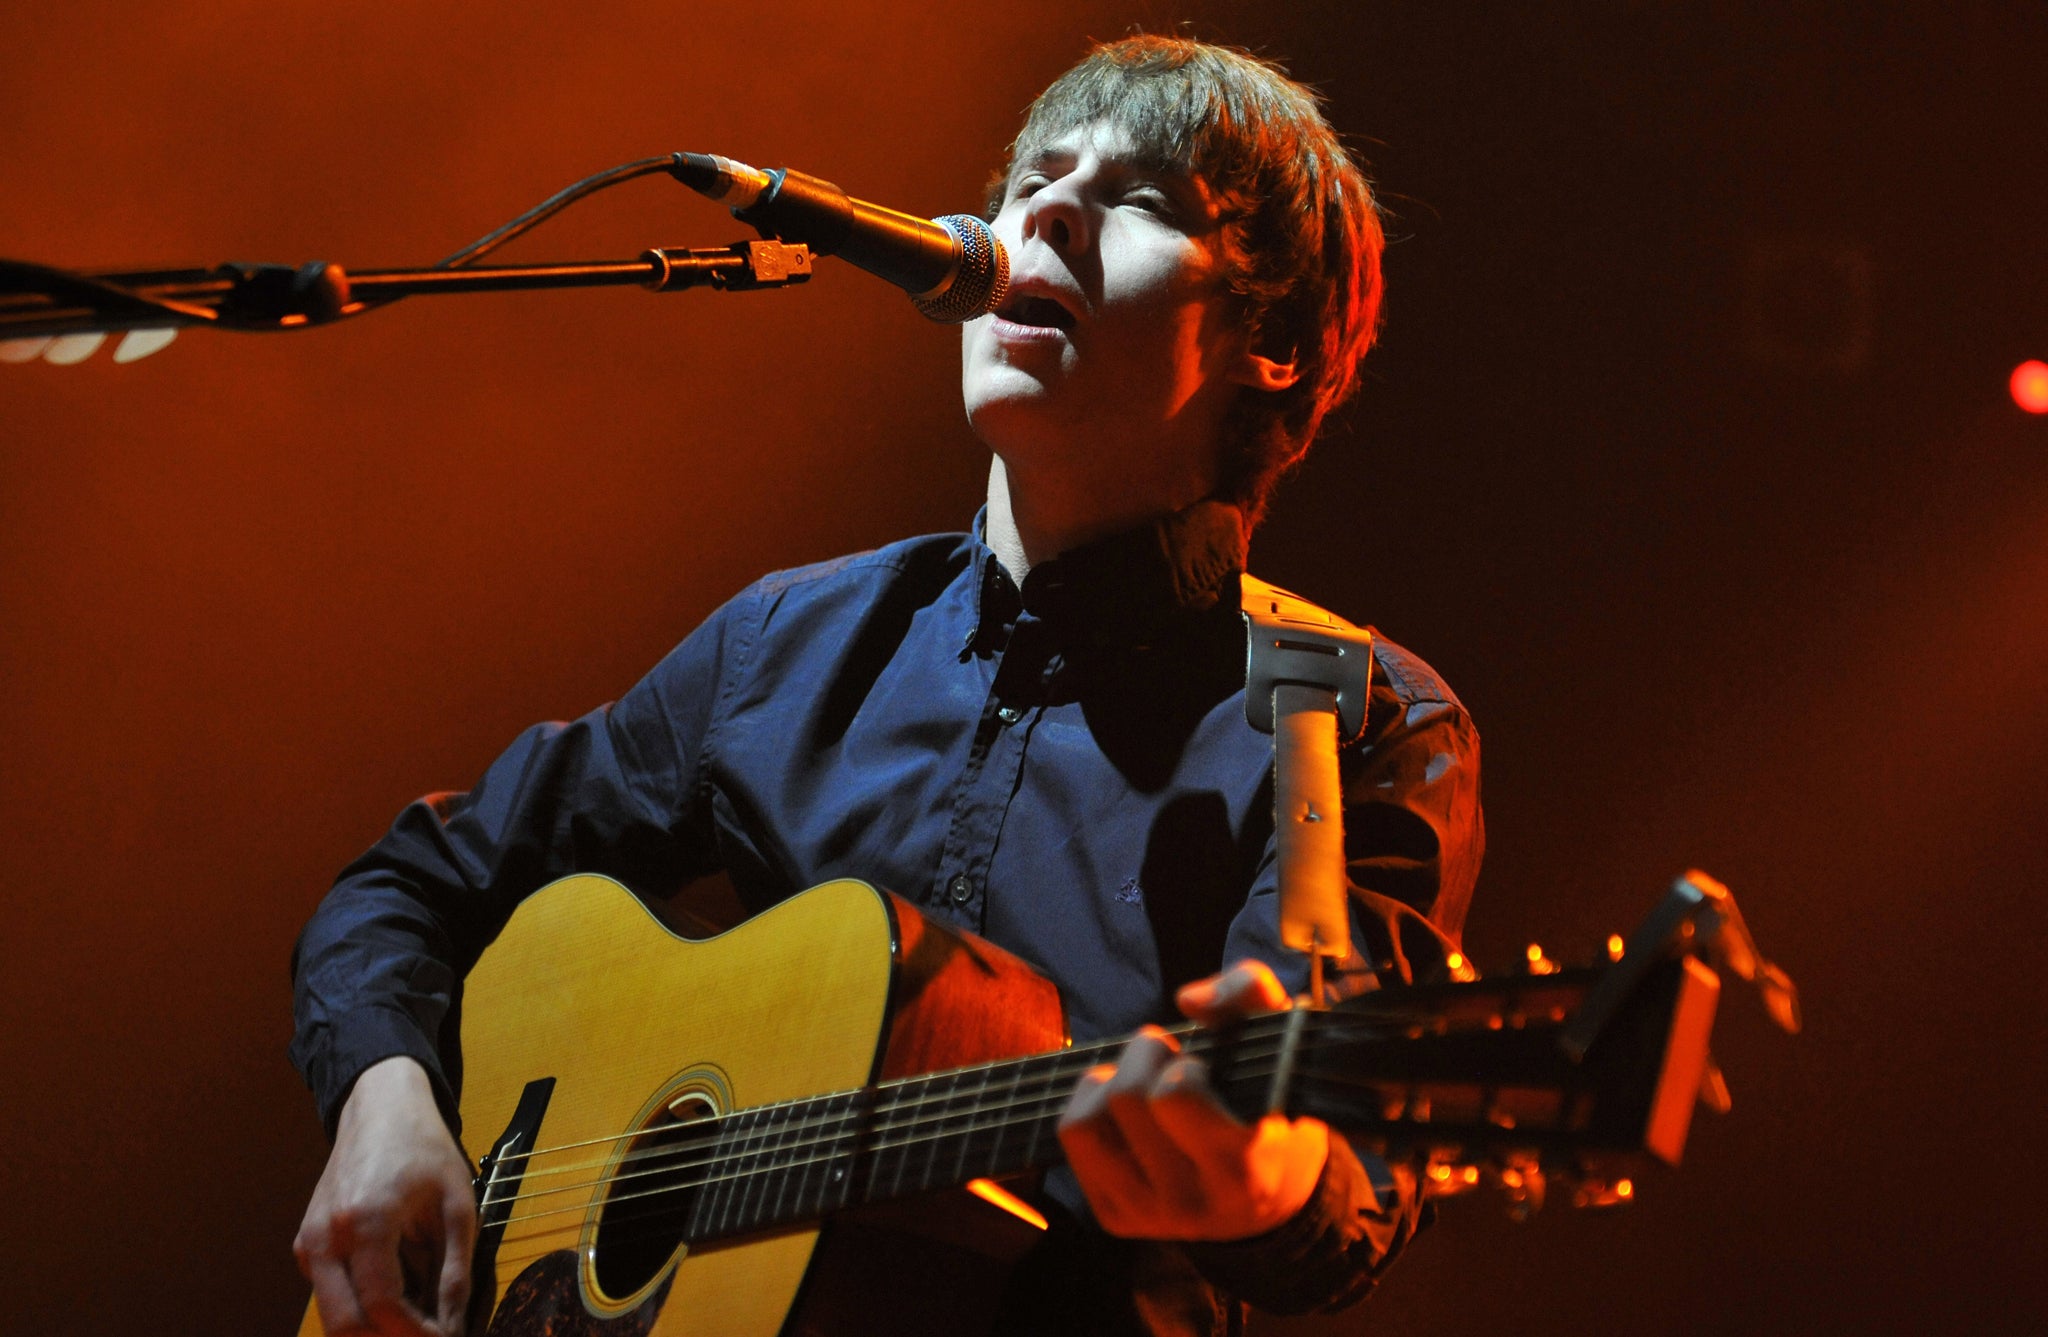 Jake Bugg: He can do it! It’s not just hype! He’s as good as his YouTube clips!